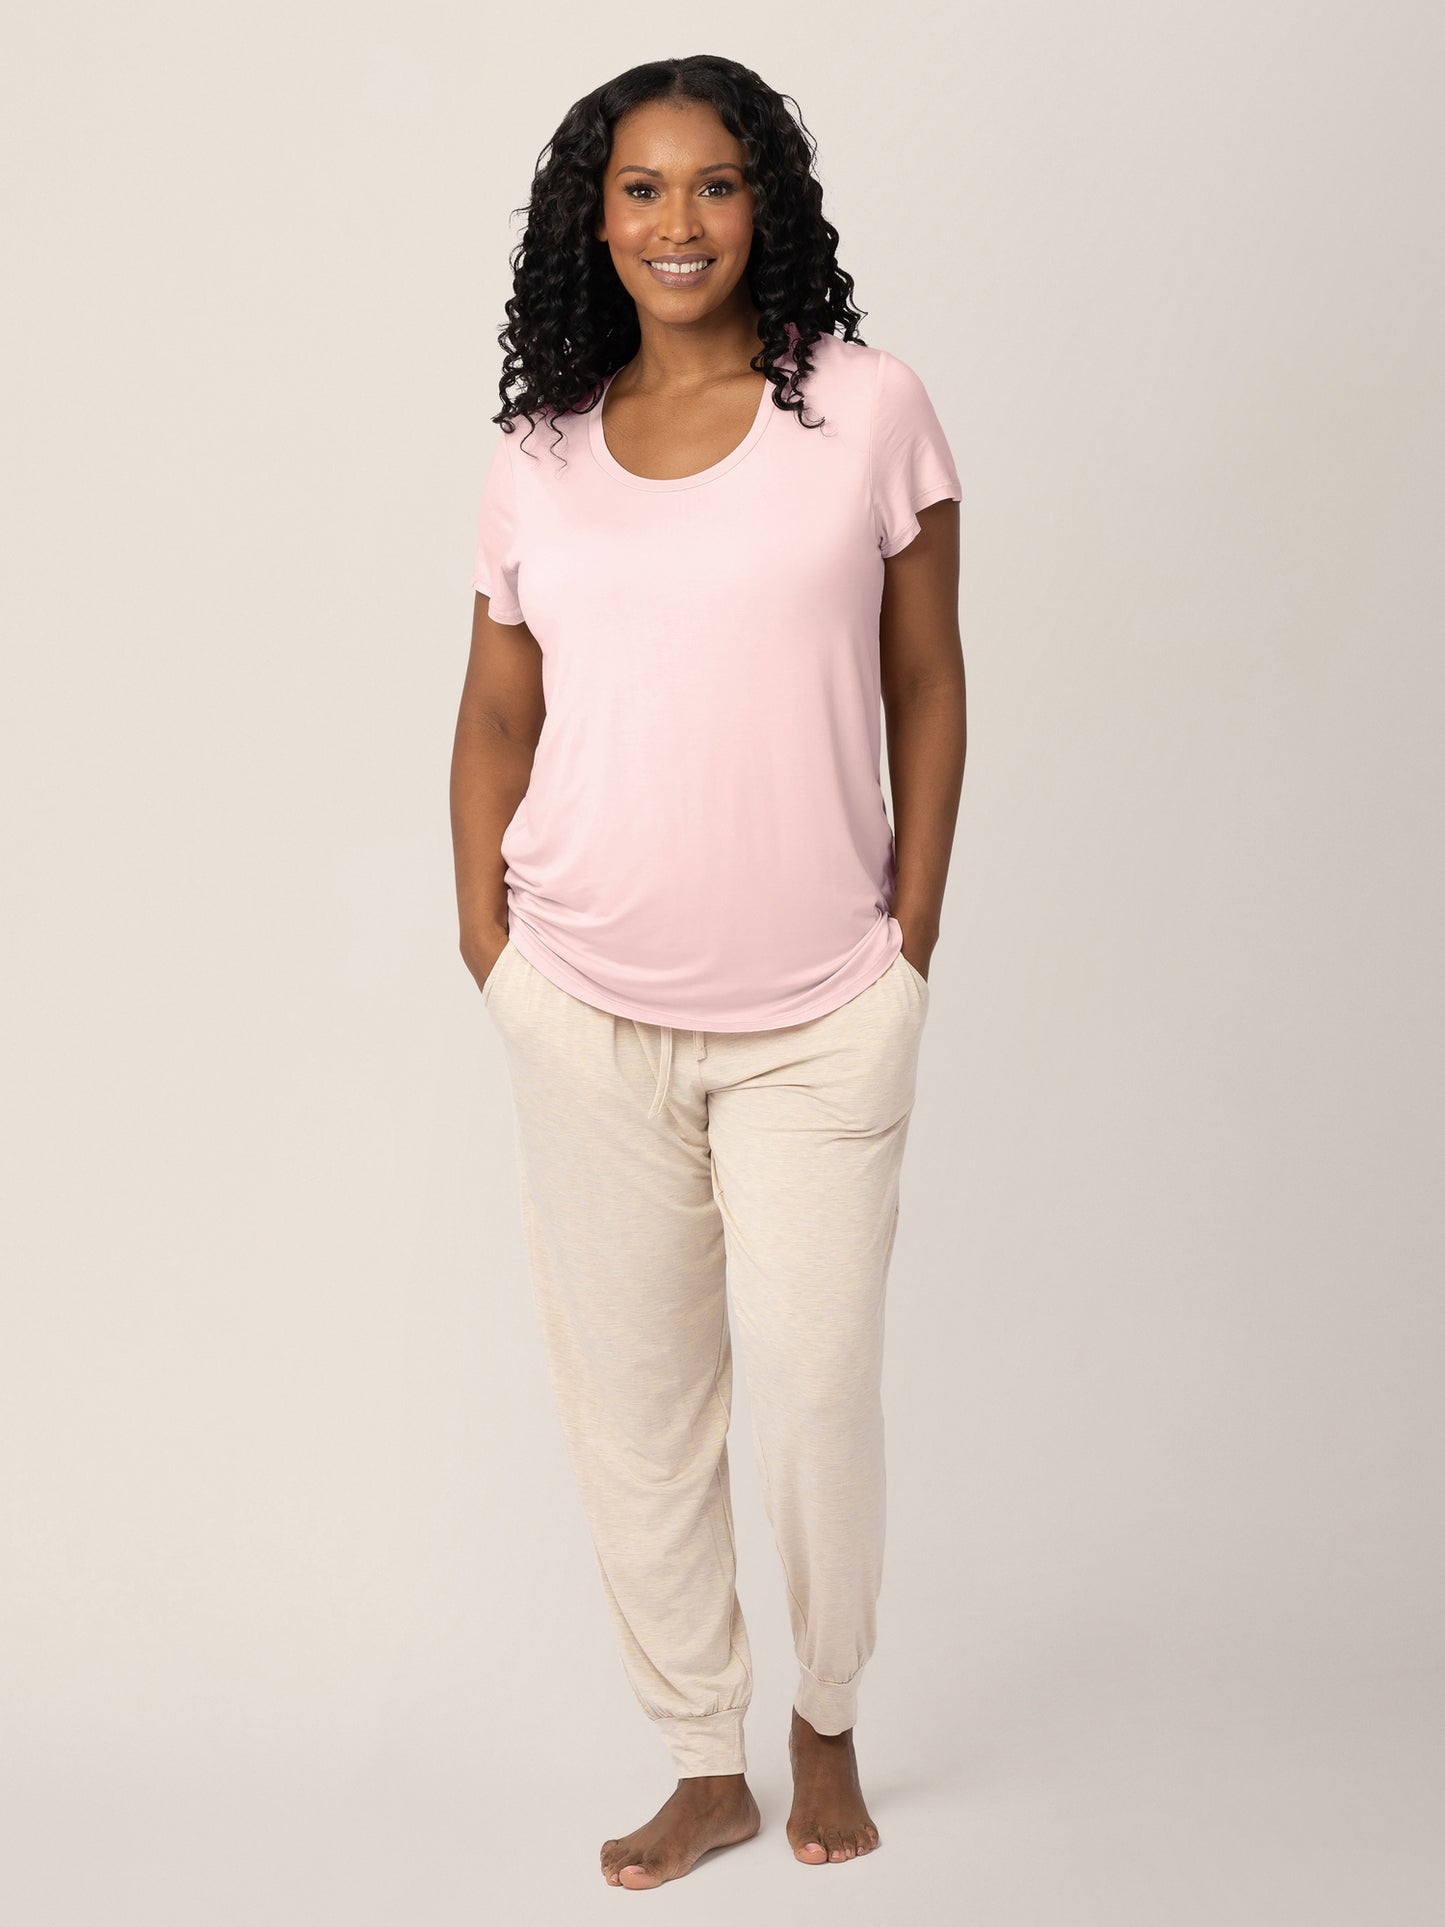 Full body view of a model wearing the  Everyday Maternity & Nursing T-shirt in Dusty Pink